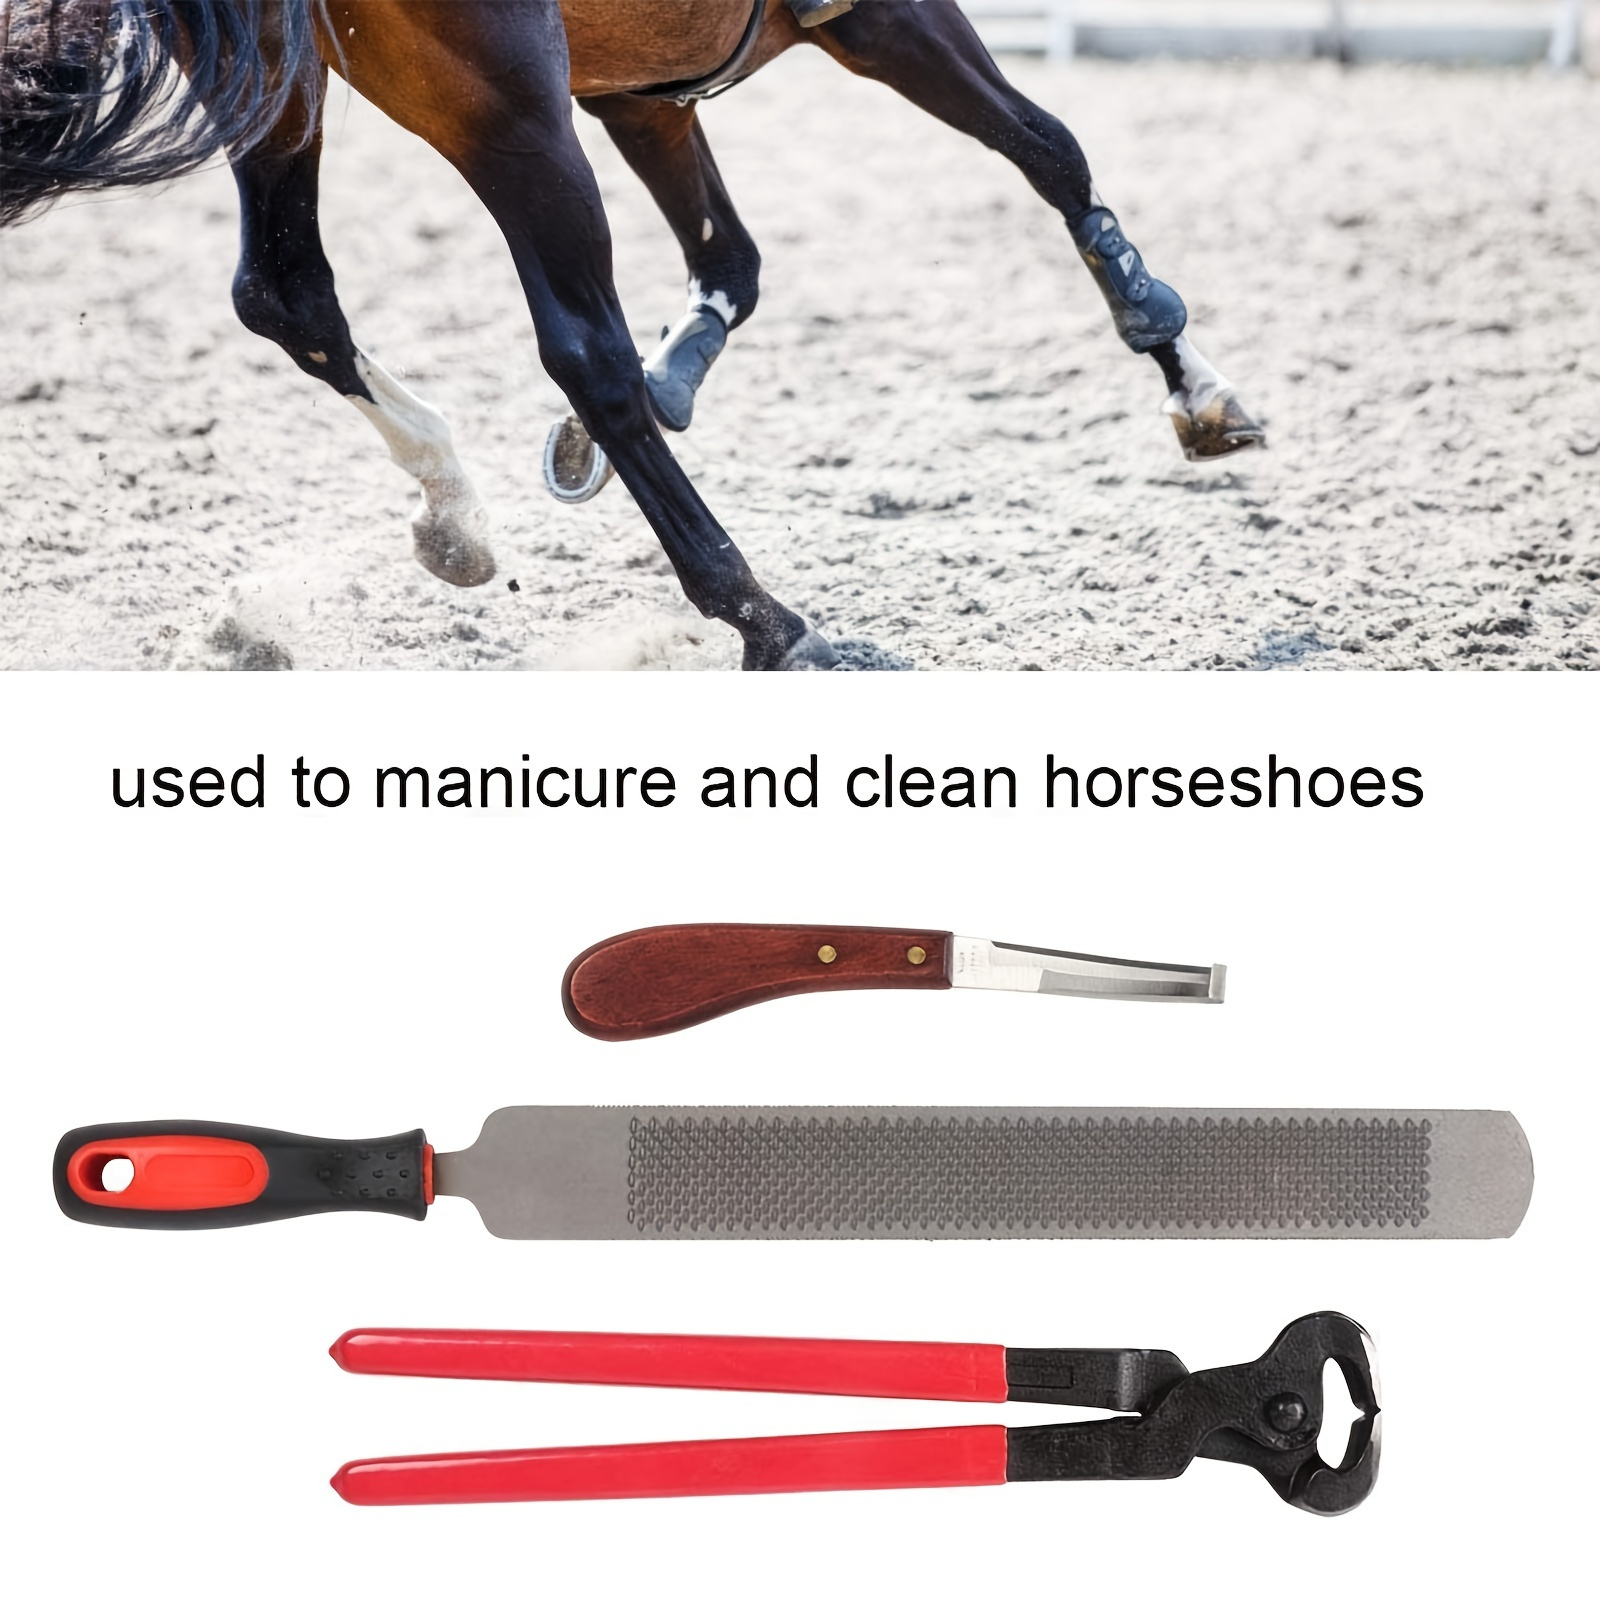 

Professional Horse Farrier Hoof Trimming Tool Kit - Perfect For Equine Care!